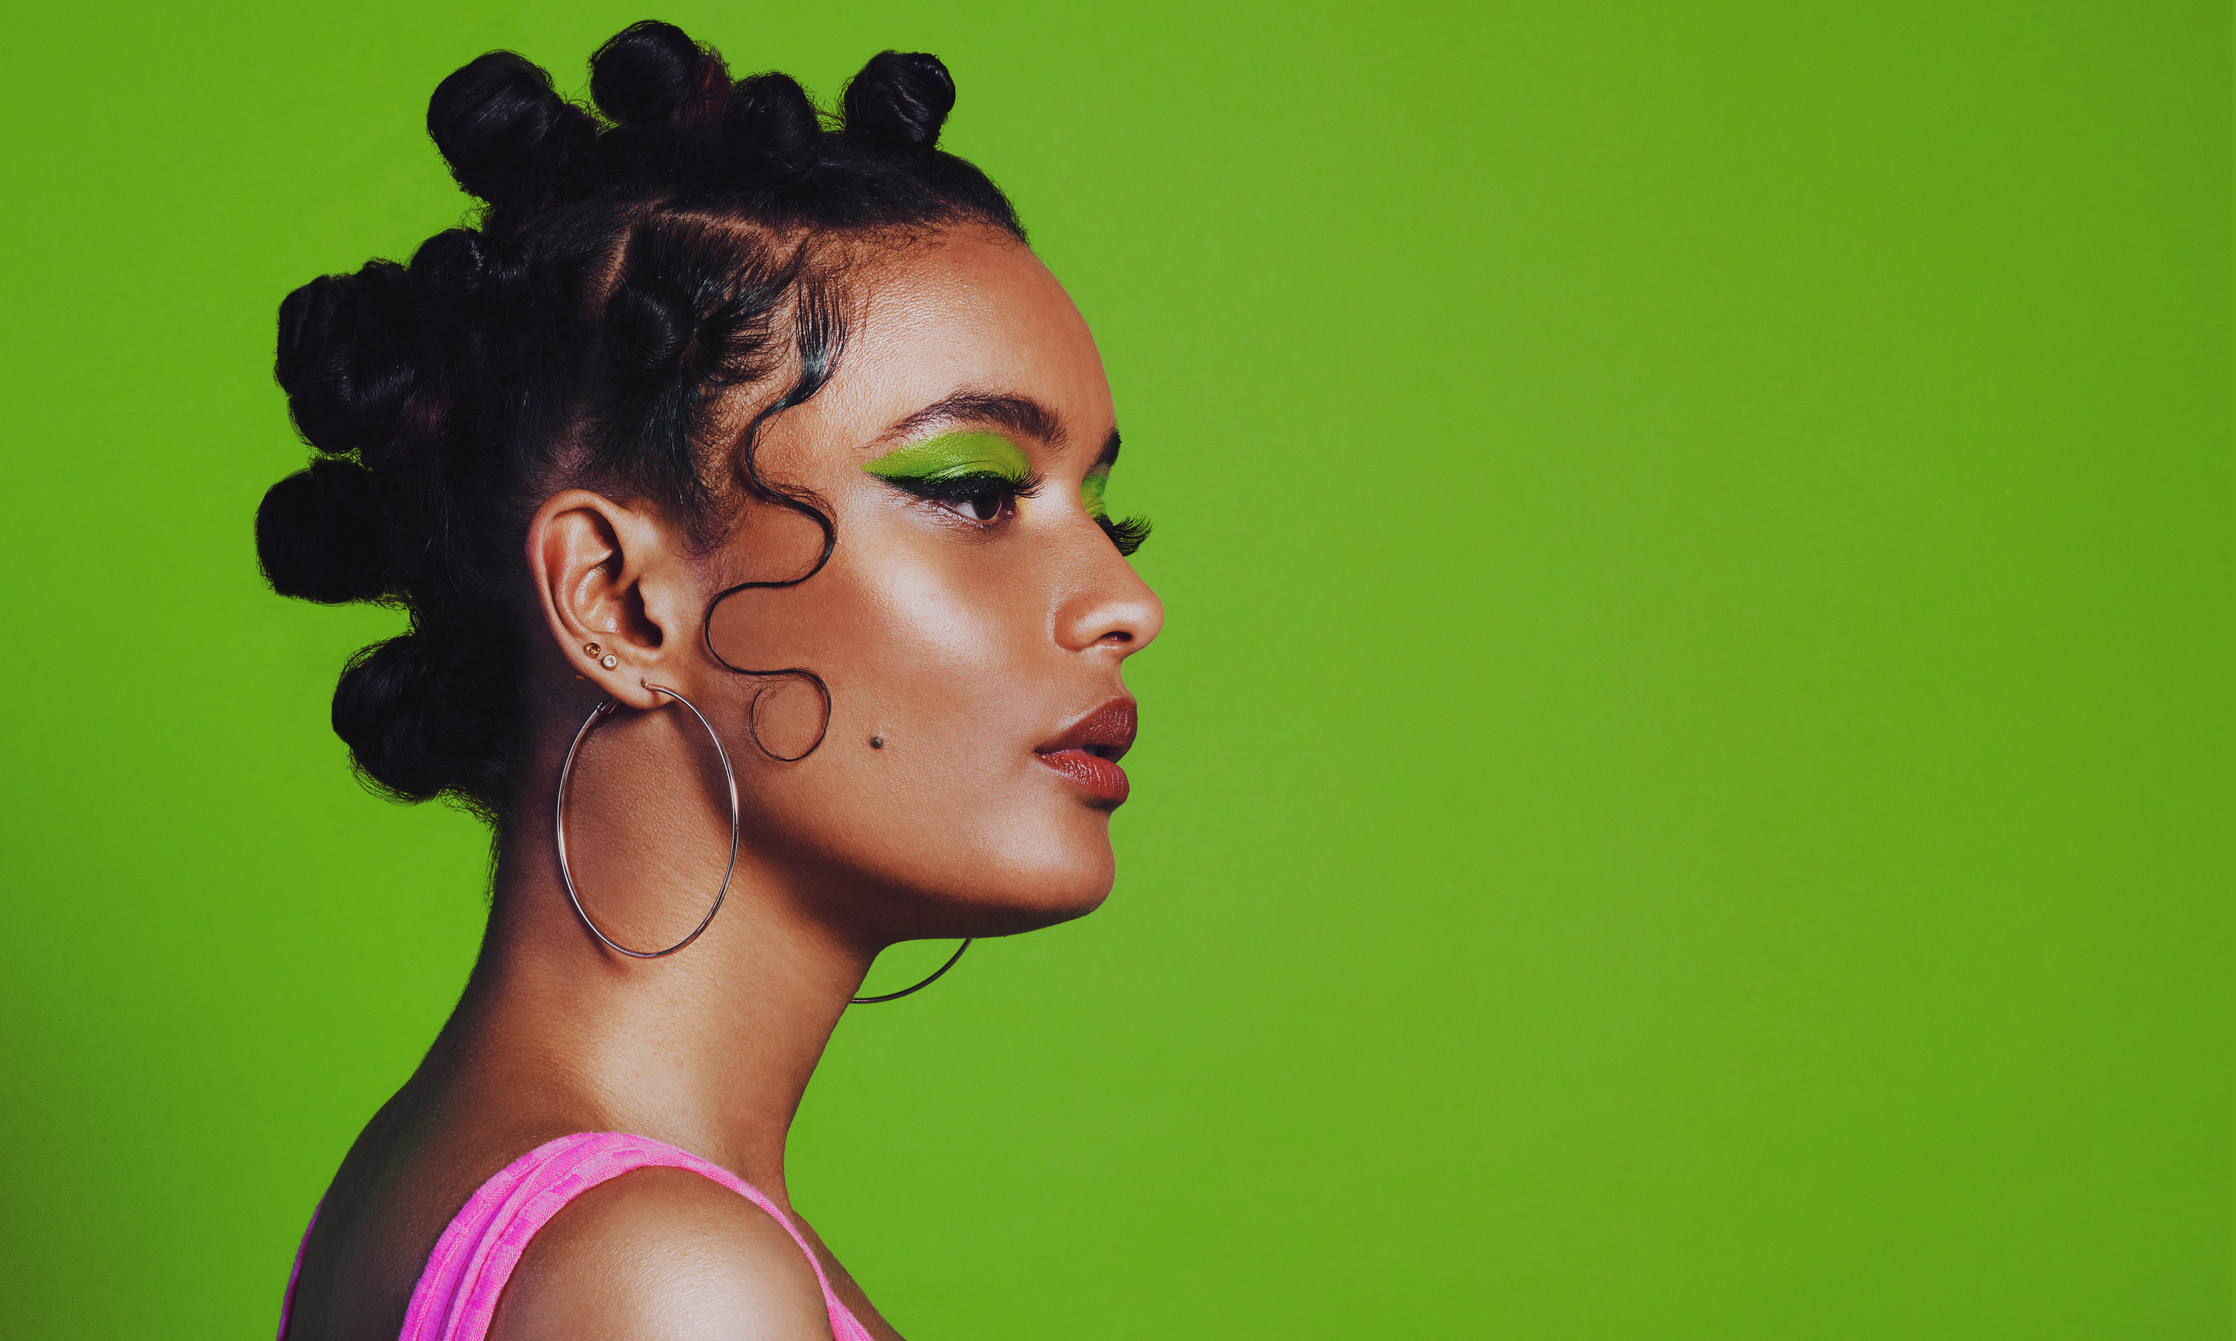 Canva Receives Backlash For Its App Labeling 'Black Woman With Bantu Knots' As 'Unsafe' In Search Results